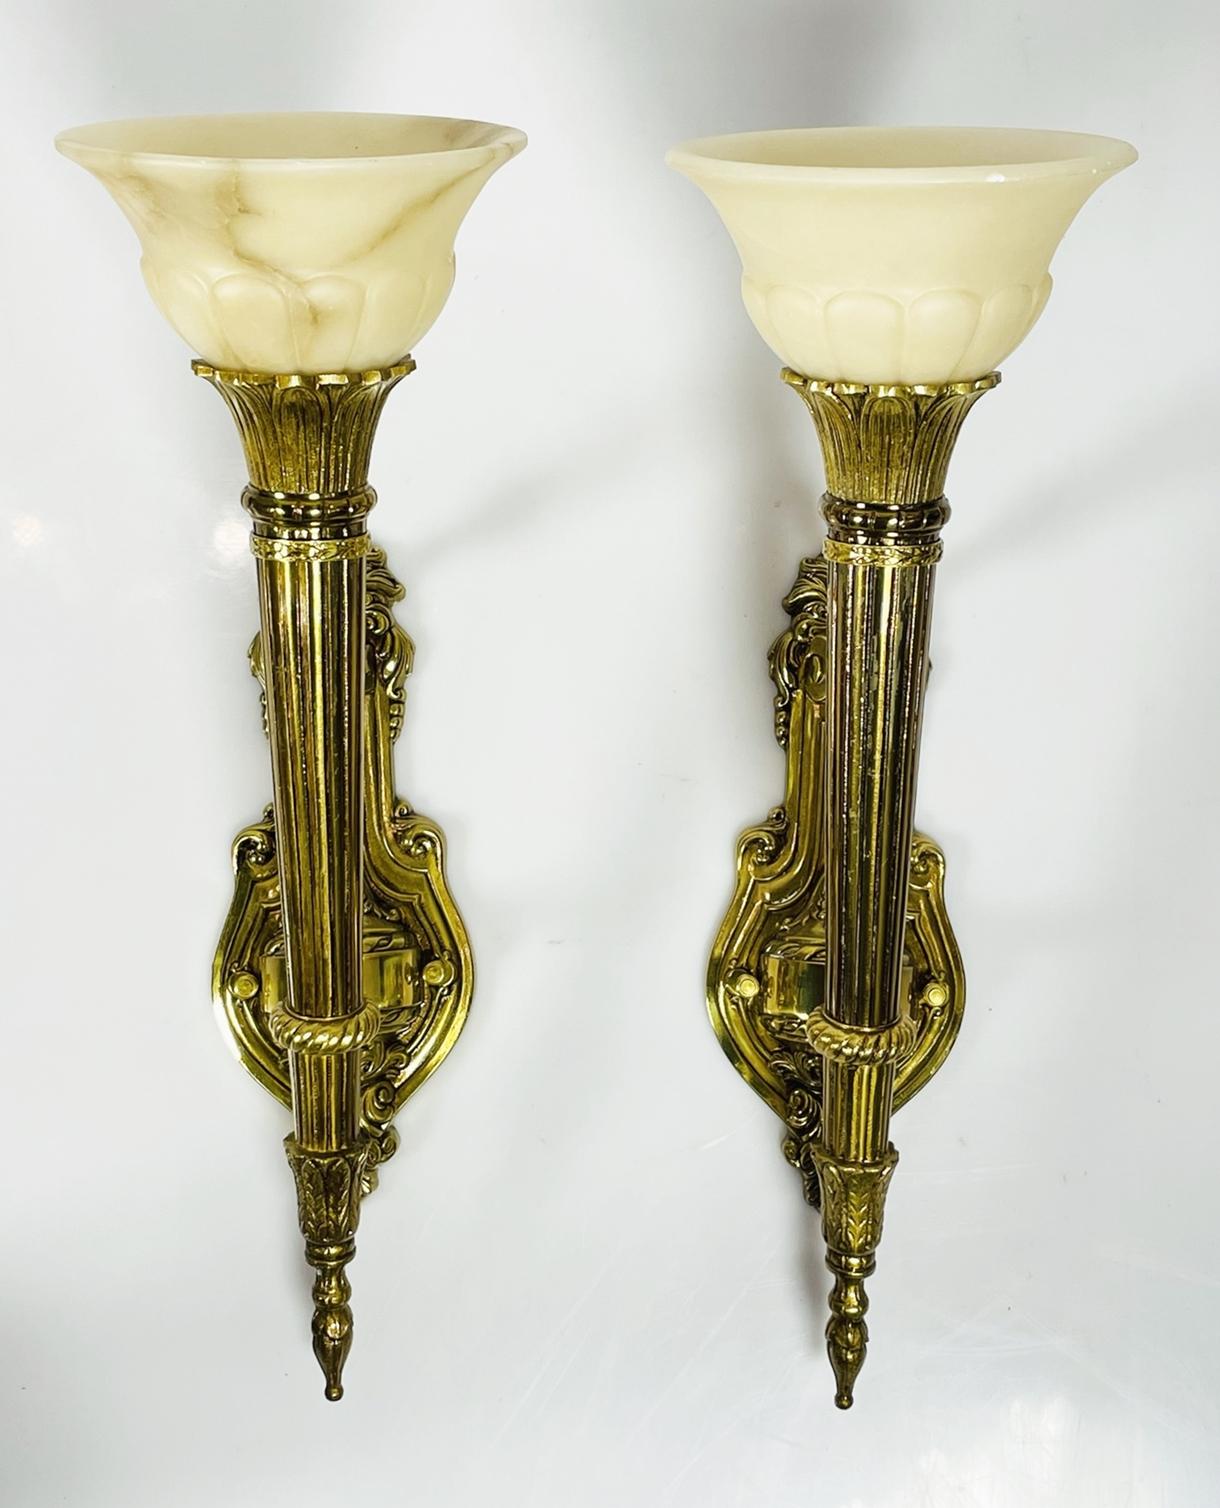 Beautiful pair of cast brass and alabaster wall sconces.
The sconces have a wonderful shape, they are very unique and well made.
Manufactured on 2002.

